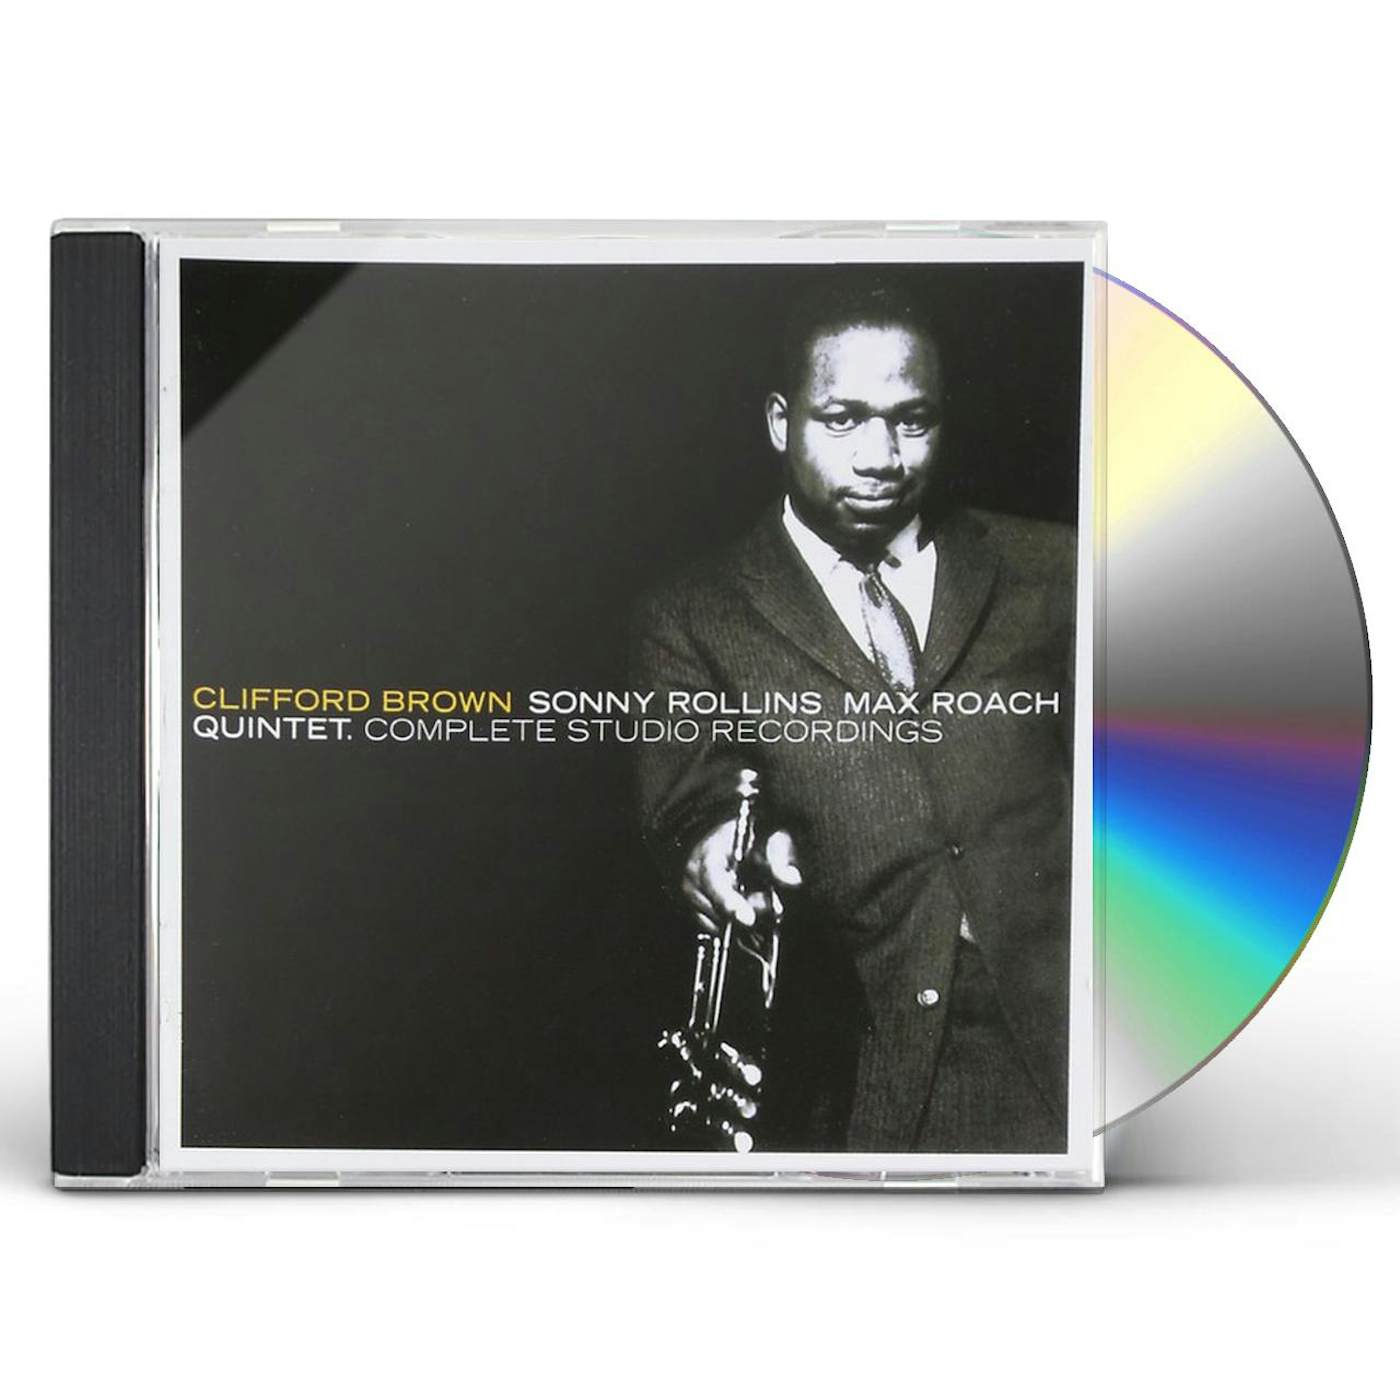 Clifford Brown / Sonny Rollins / Max Roach COMPLETE STUDIO RECORDINGS CD